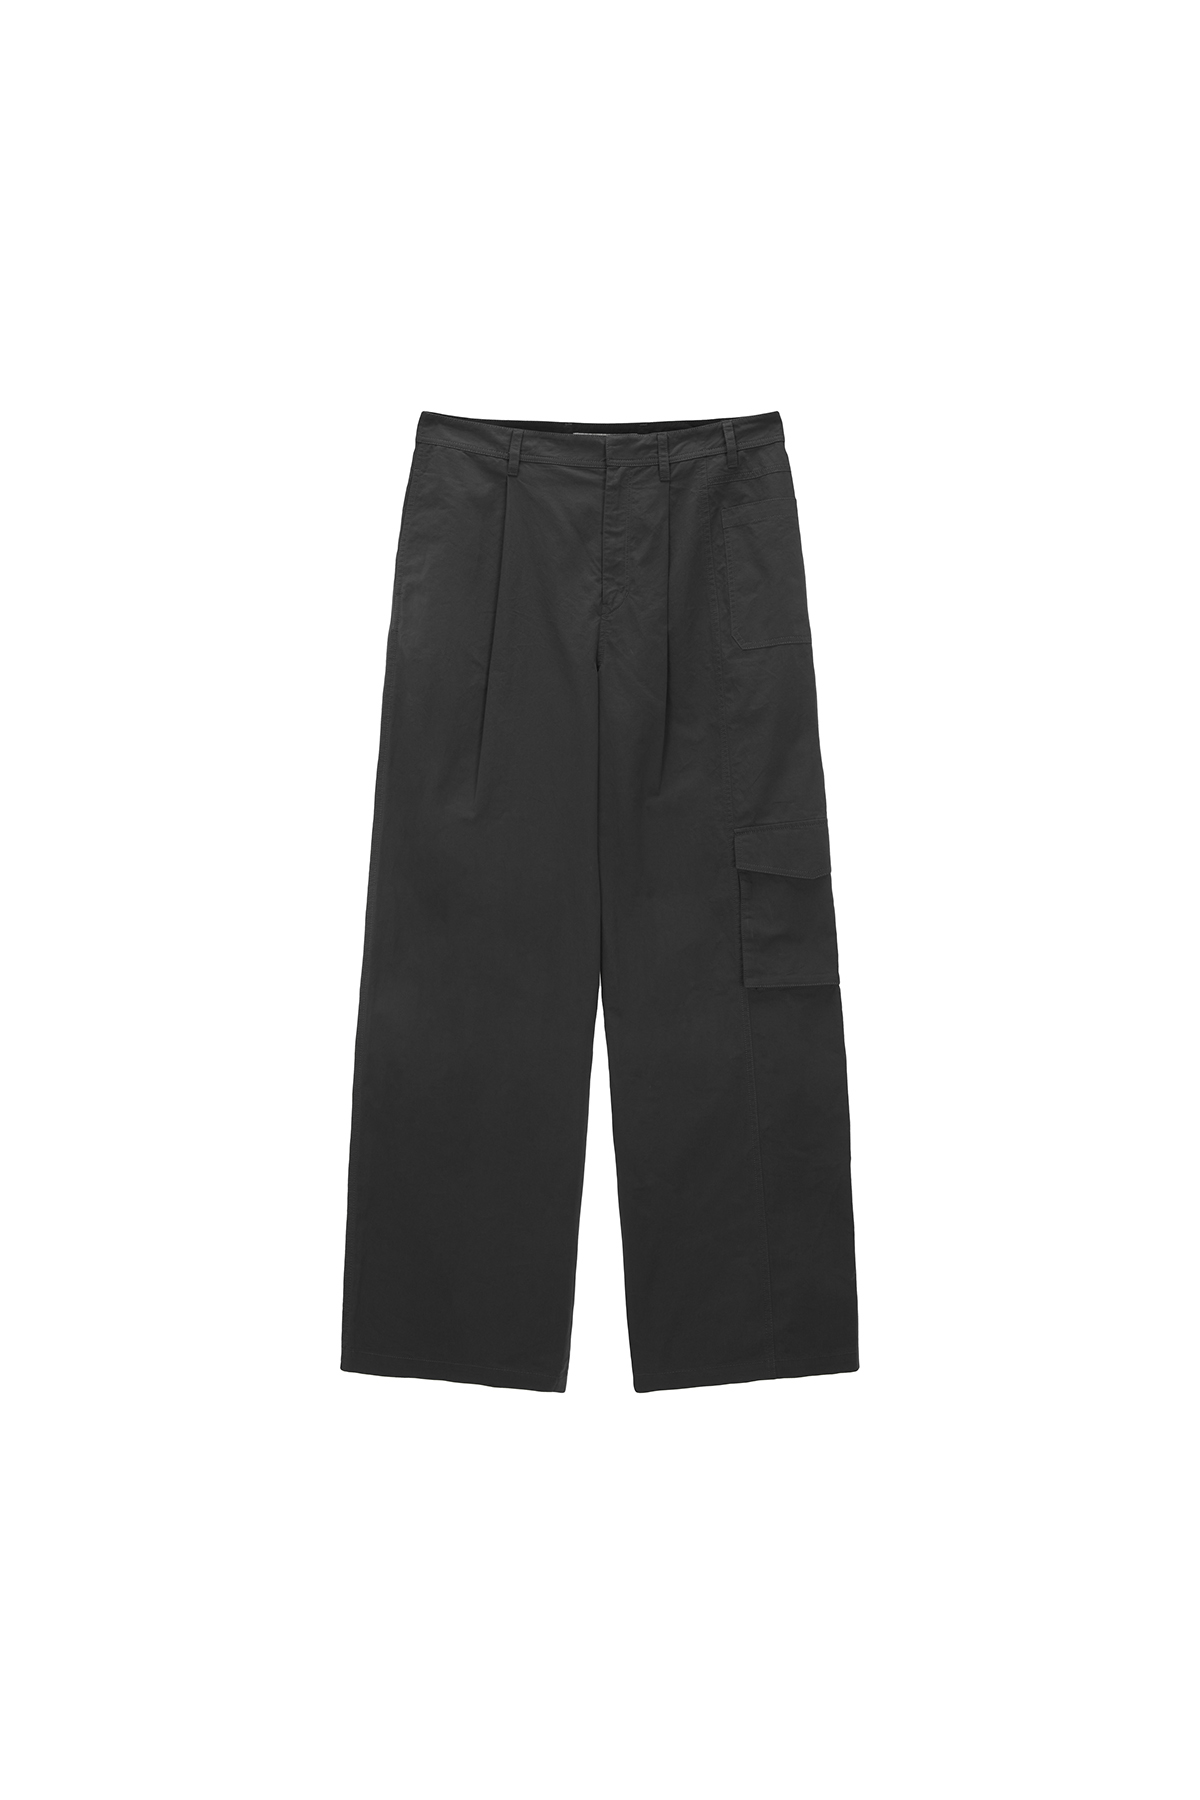 ASYMMETRIC CHINO TROUSER FOR MEN IN CHARCOAL